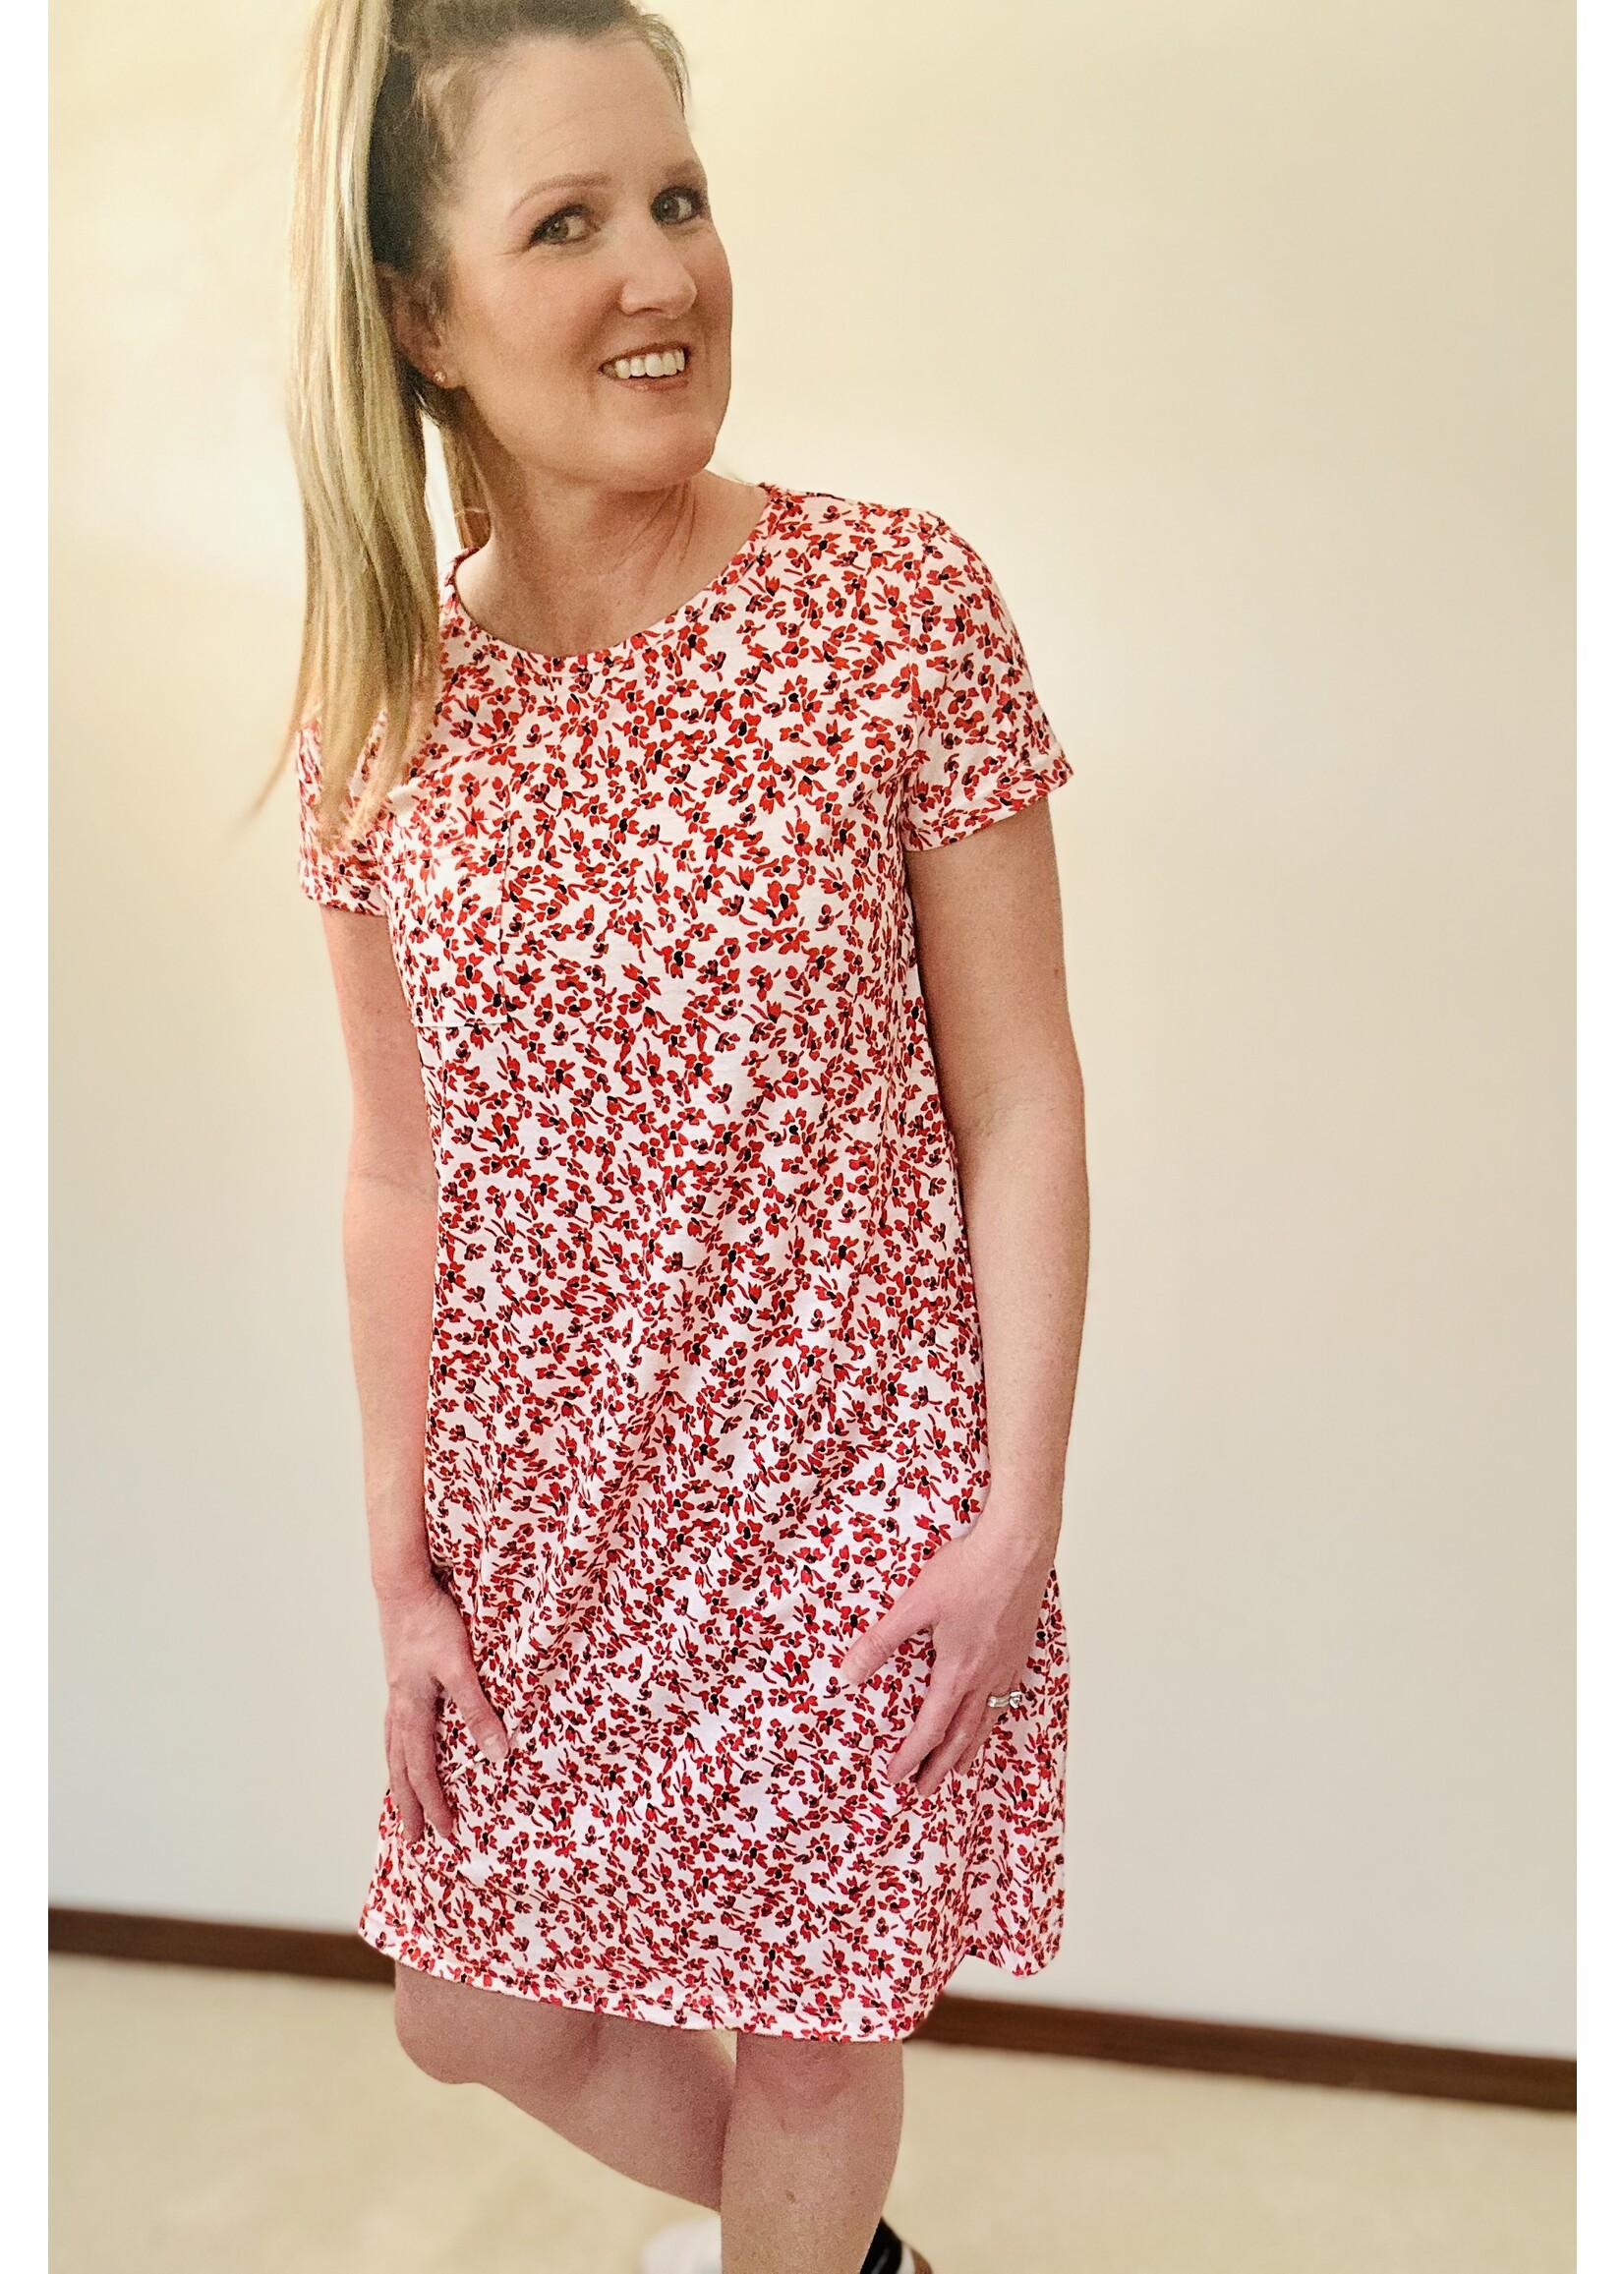 The Kami T-Shirt Dress in Red Floral